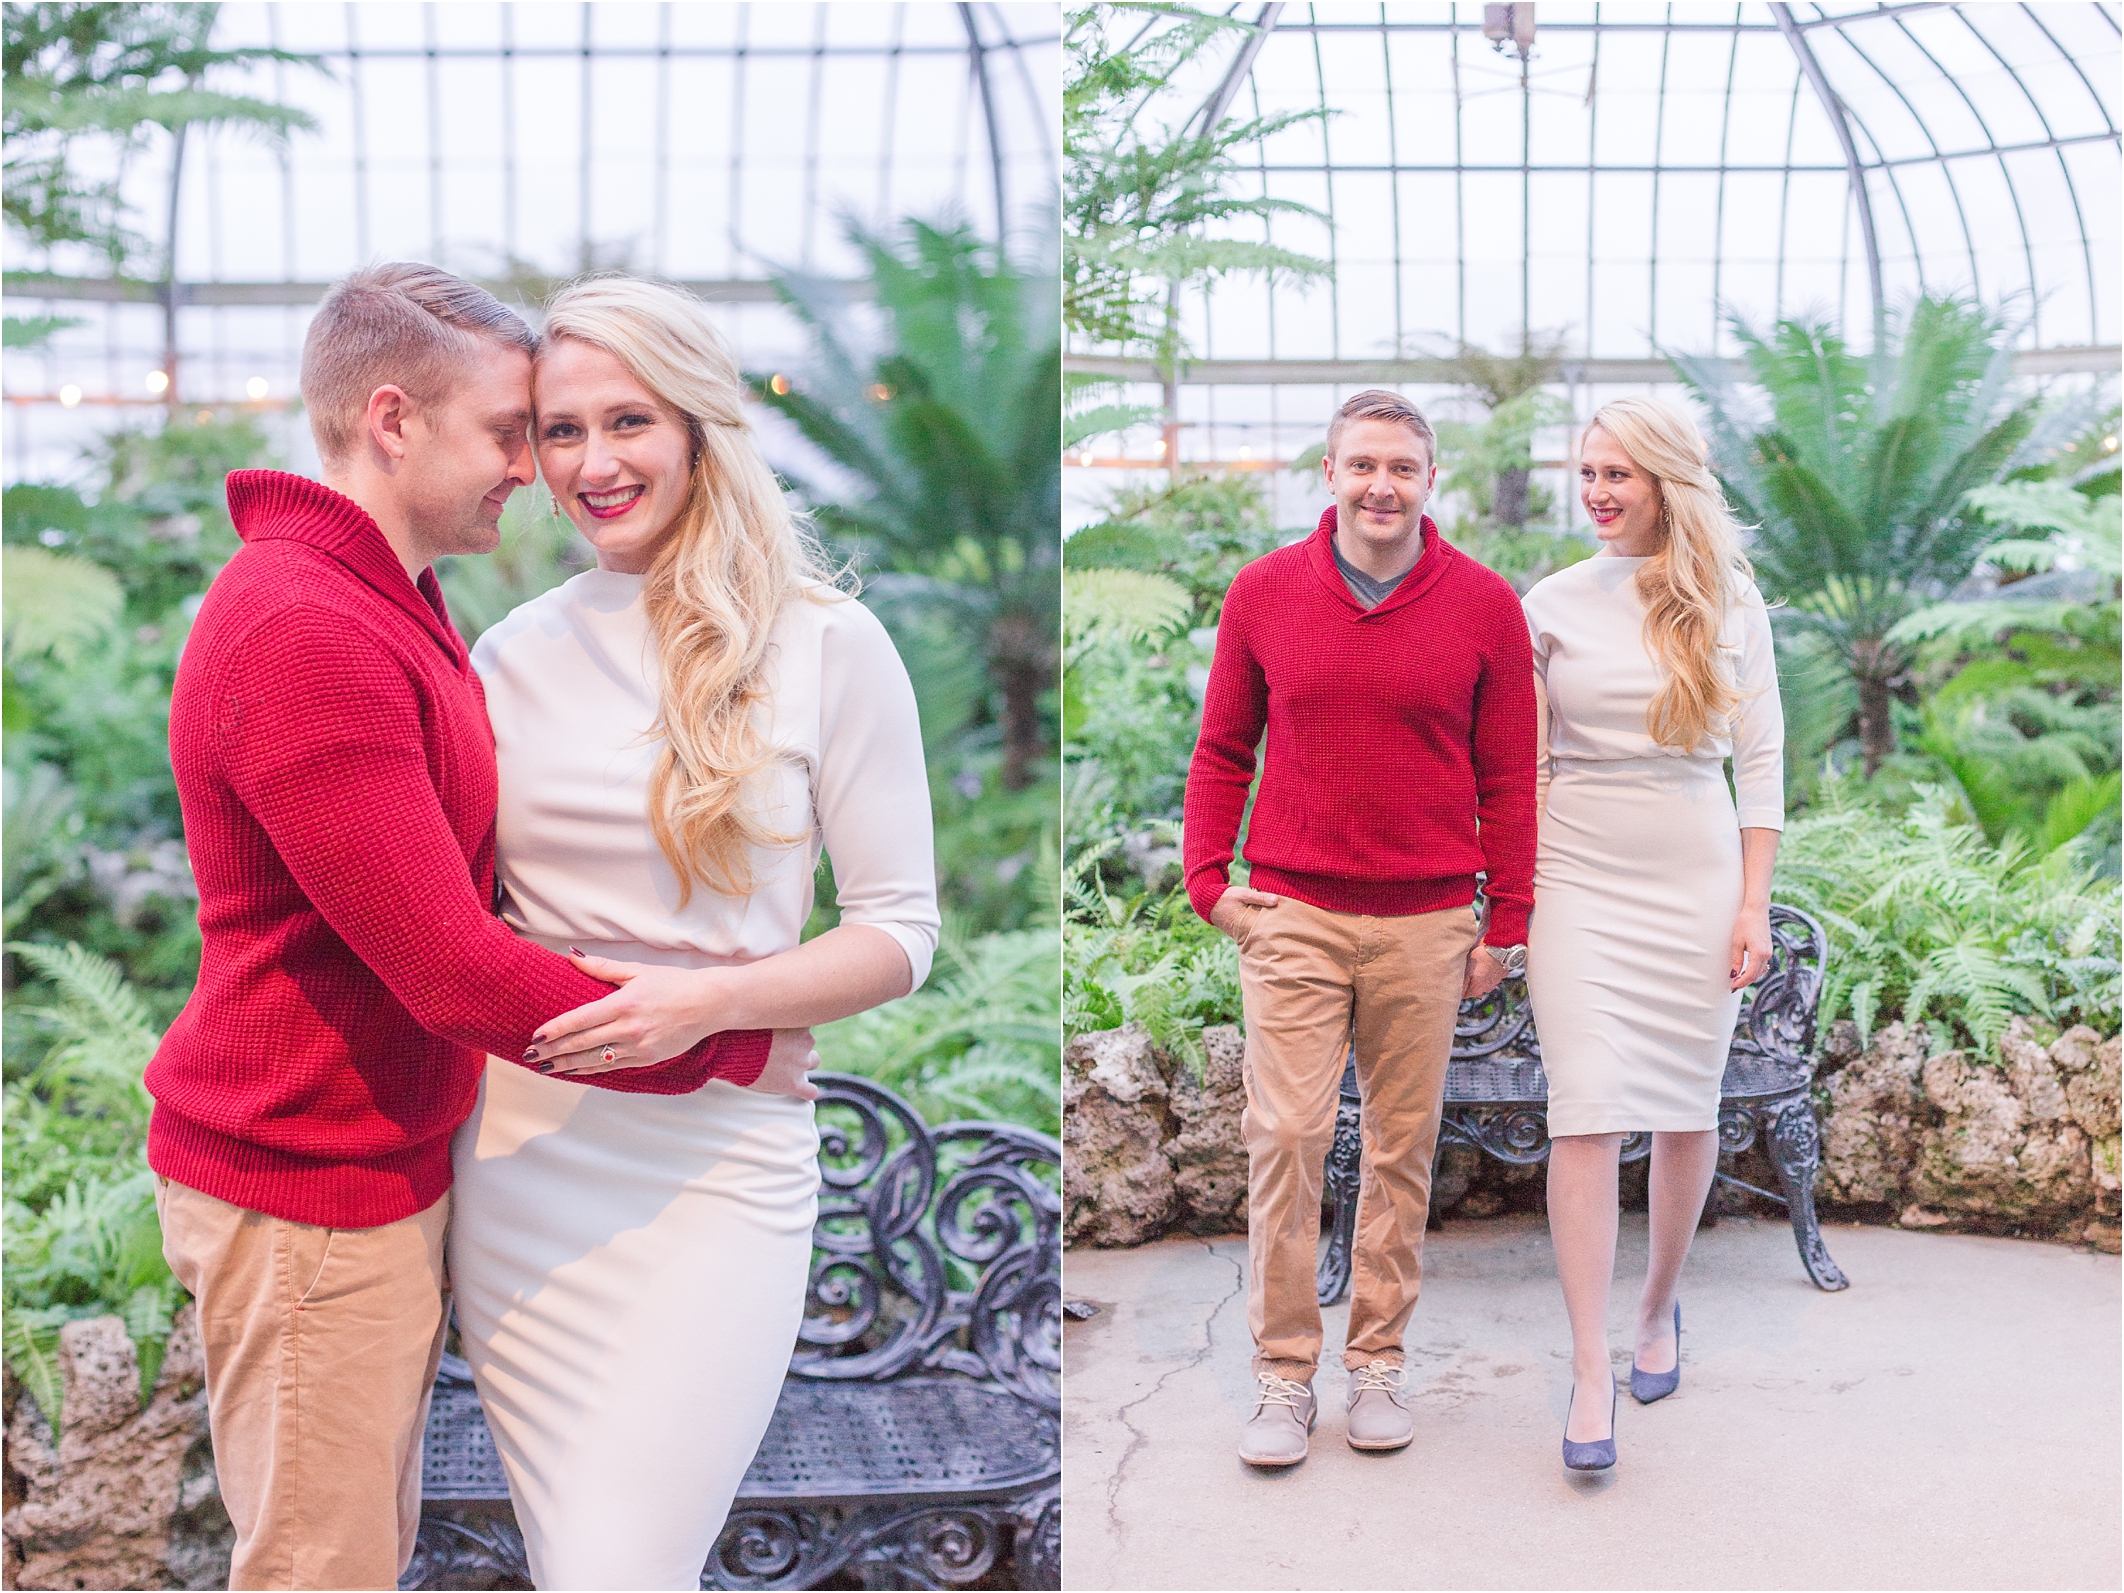 elegant-classic-belle-isle-conservatory-engagement-photos-in-detroit-mi-by-courtney-carolyn-photography_0024.jpg